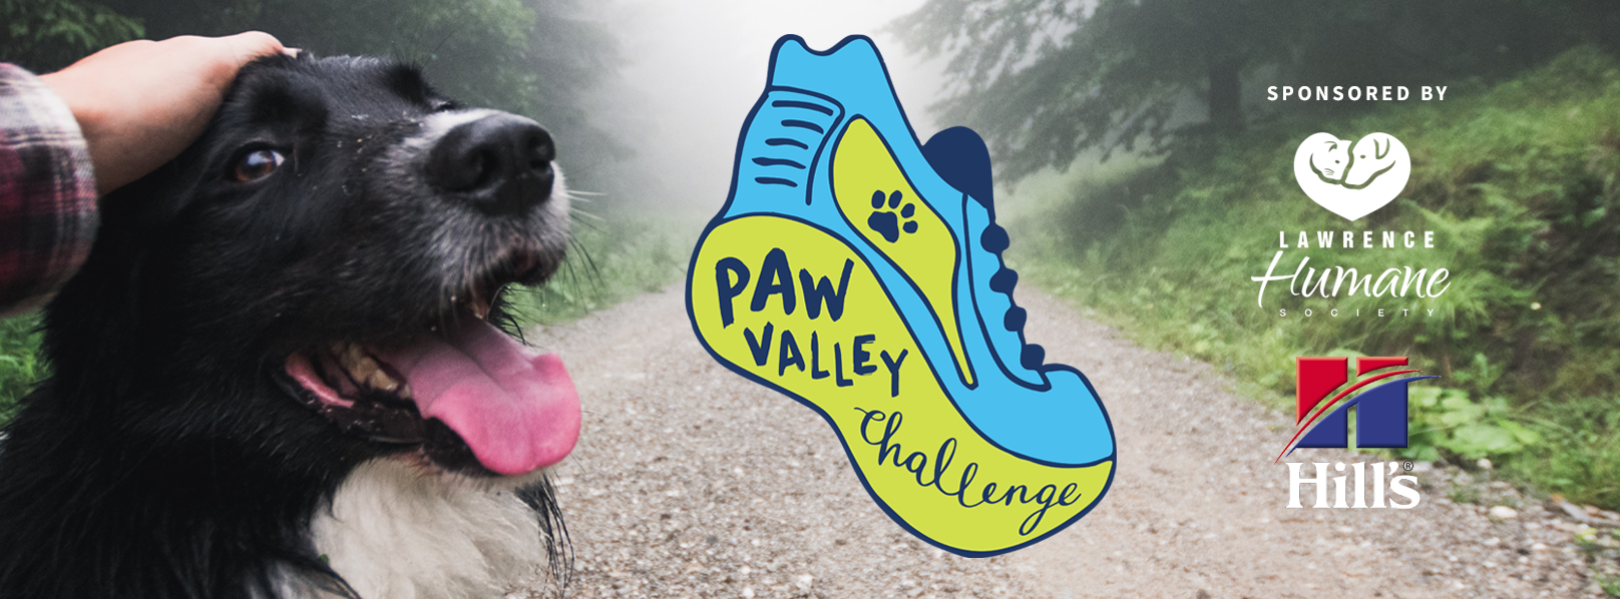 Paw Valley Challenge